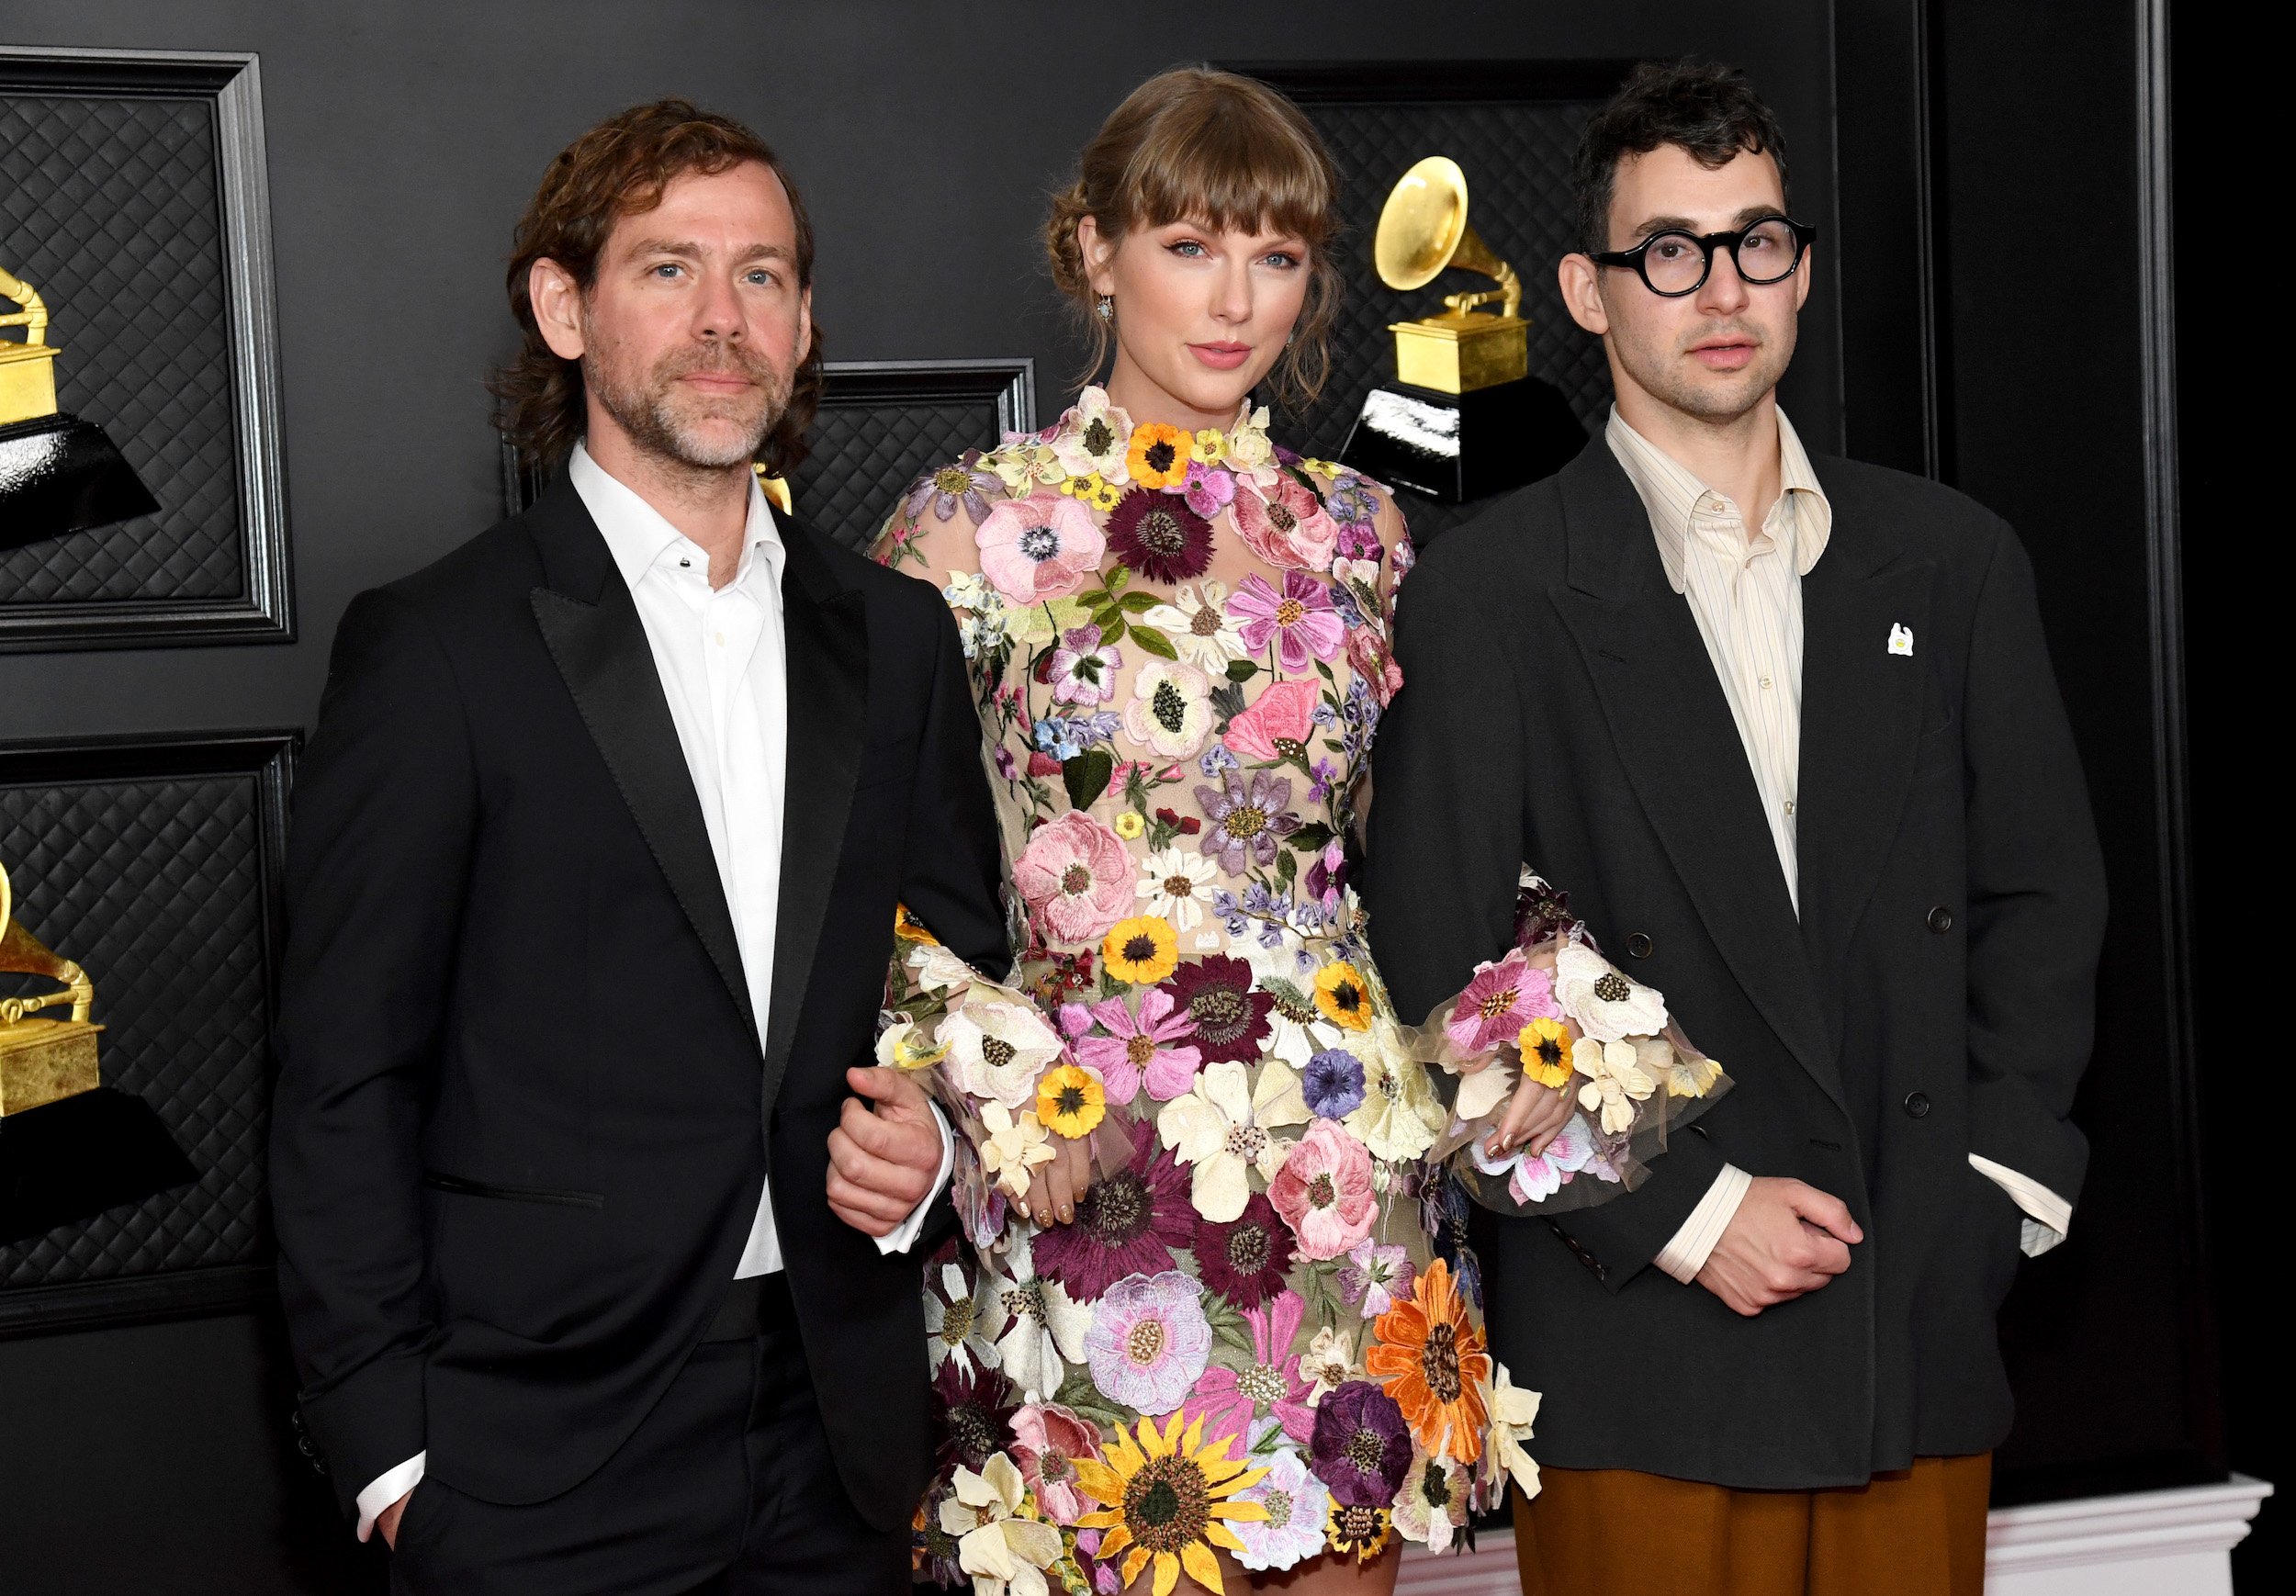 Aaron Dessner, Taylor Swift, and Jack Antonoff attend the 63rd Annual Grammy Awards in Los Angeles, California